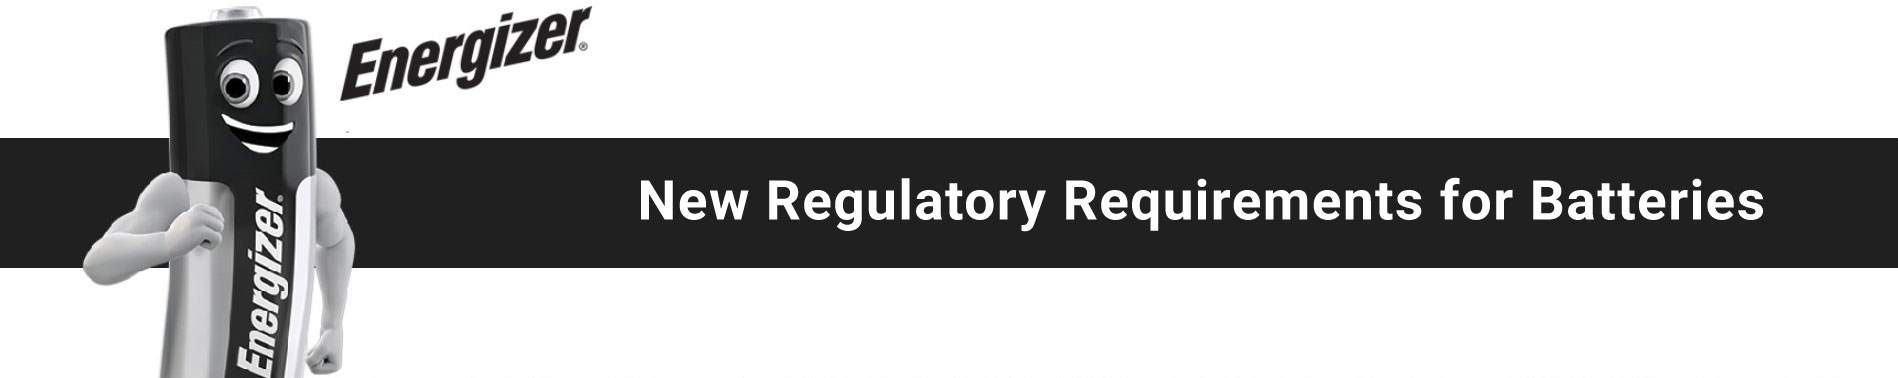 New Regulatory Requirements for Batteries